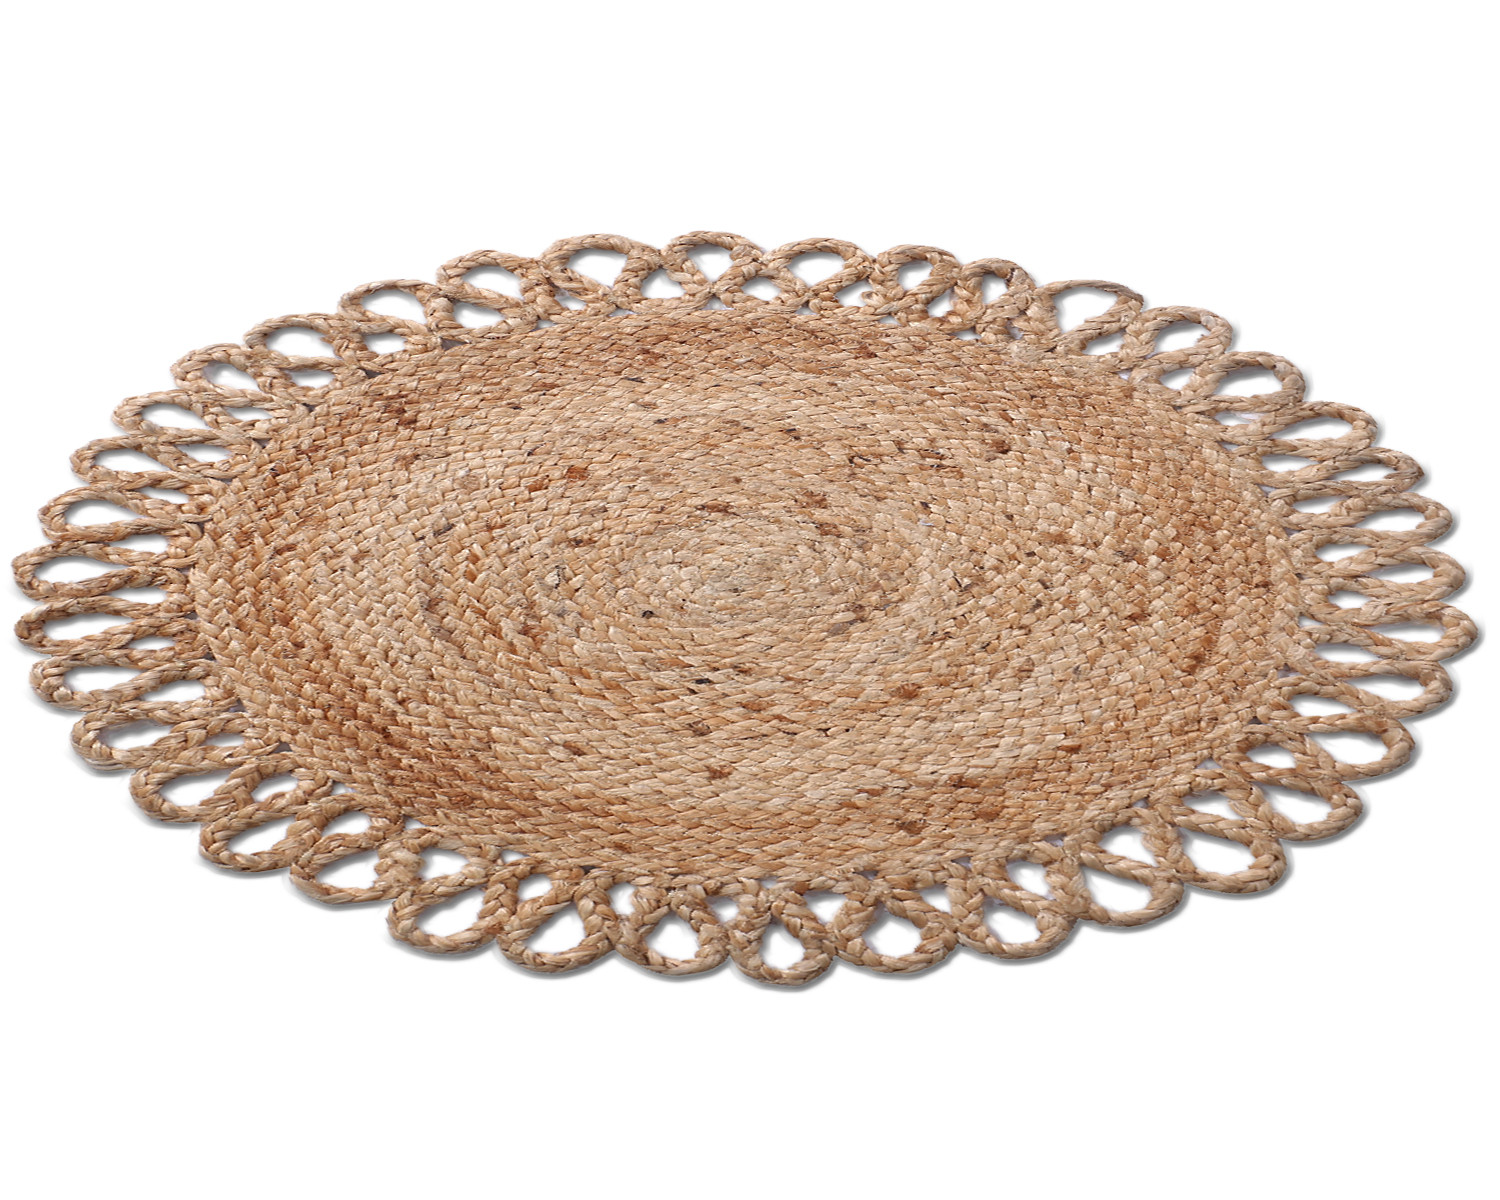 Kuber Industries Hand Woven Carpet Rugs|Natural Stitch Braided Jute Door mat|Round Shape Mat For Bedroom,Living Room,Dining Room,Yoga,72x72 cm,(Brown)